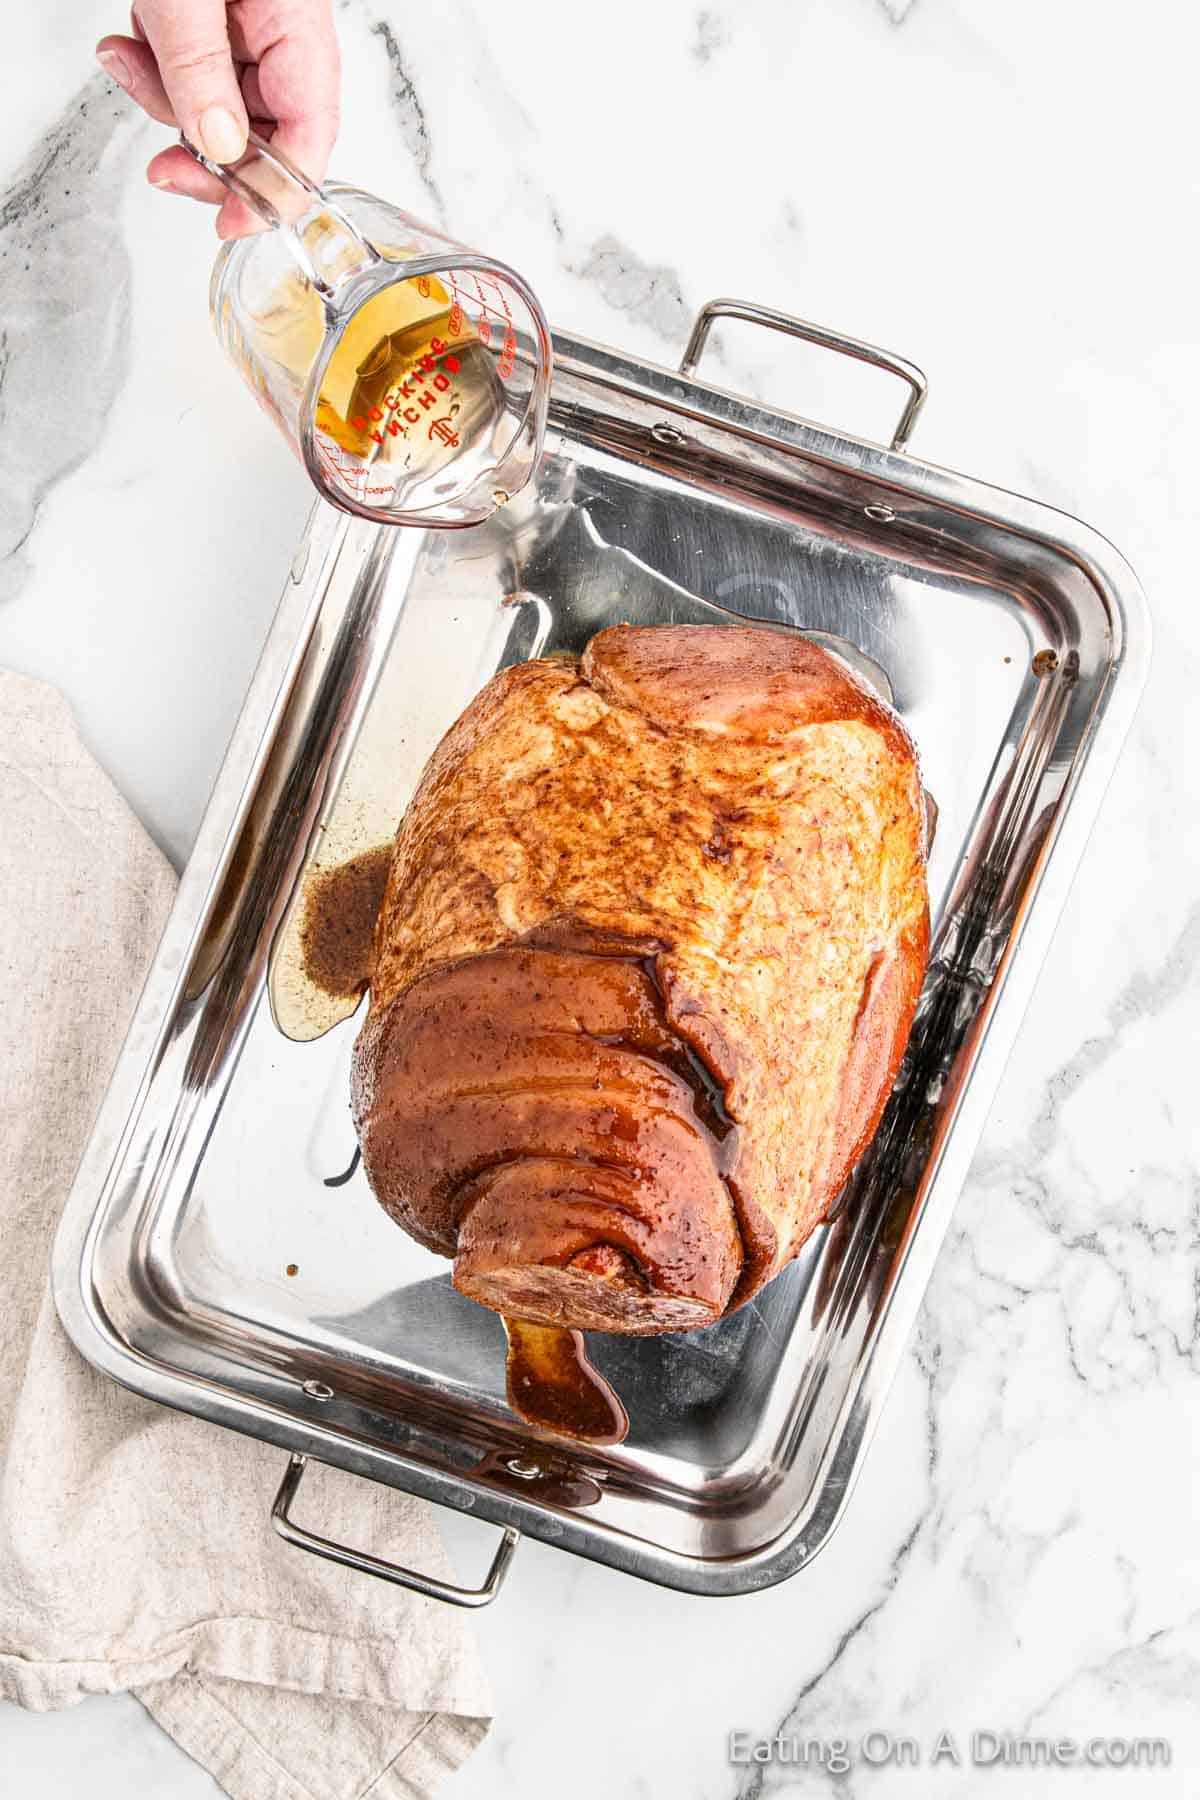 Pouring apple juice over ham in a roasting pan